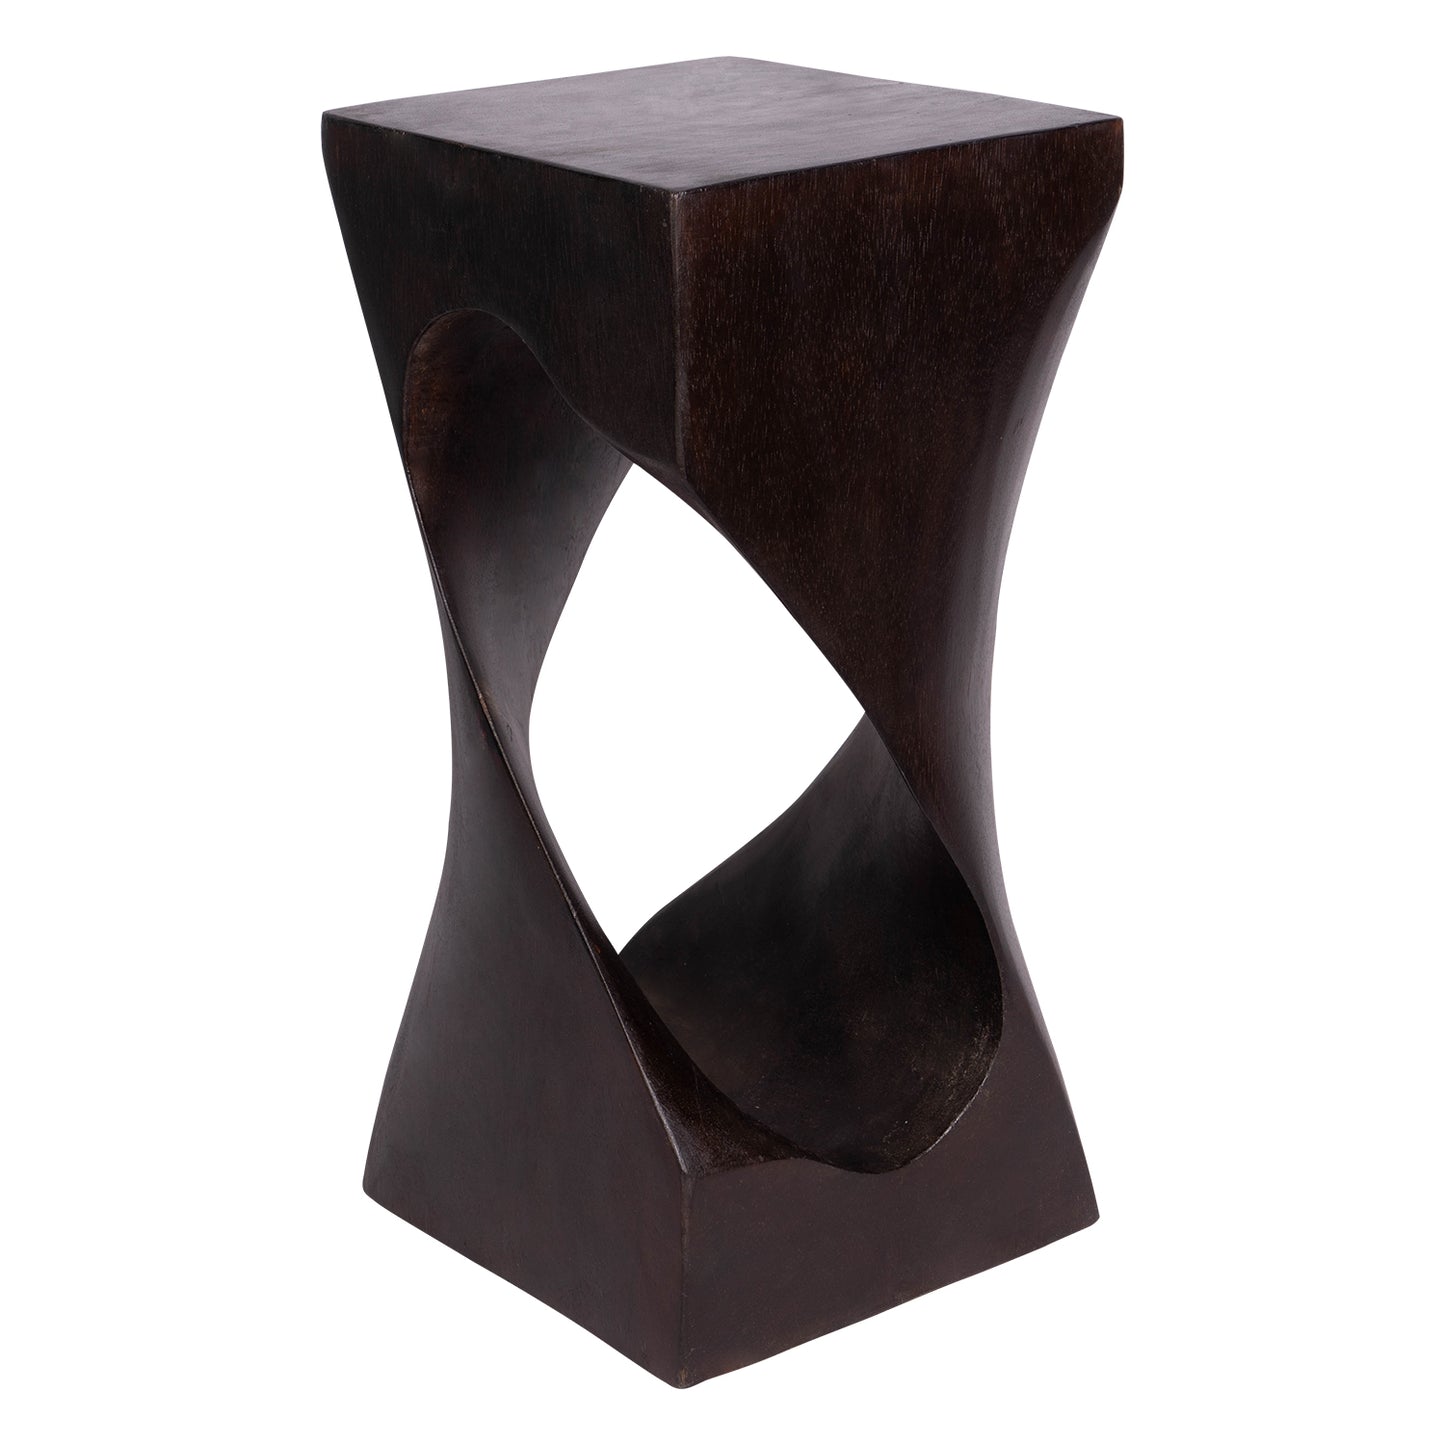 Wooden Twisted Side Table cum Stool with Walnut Oil Finish